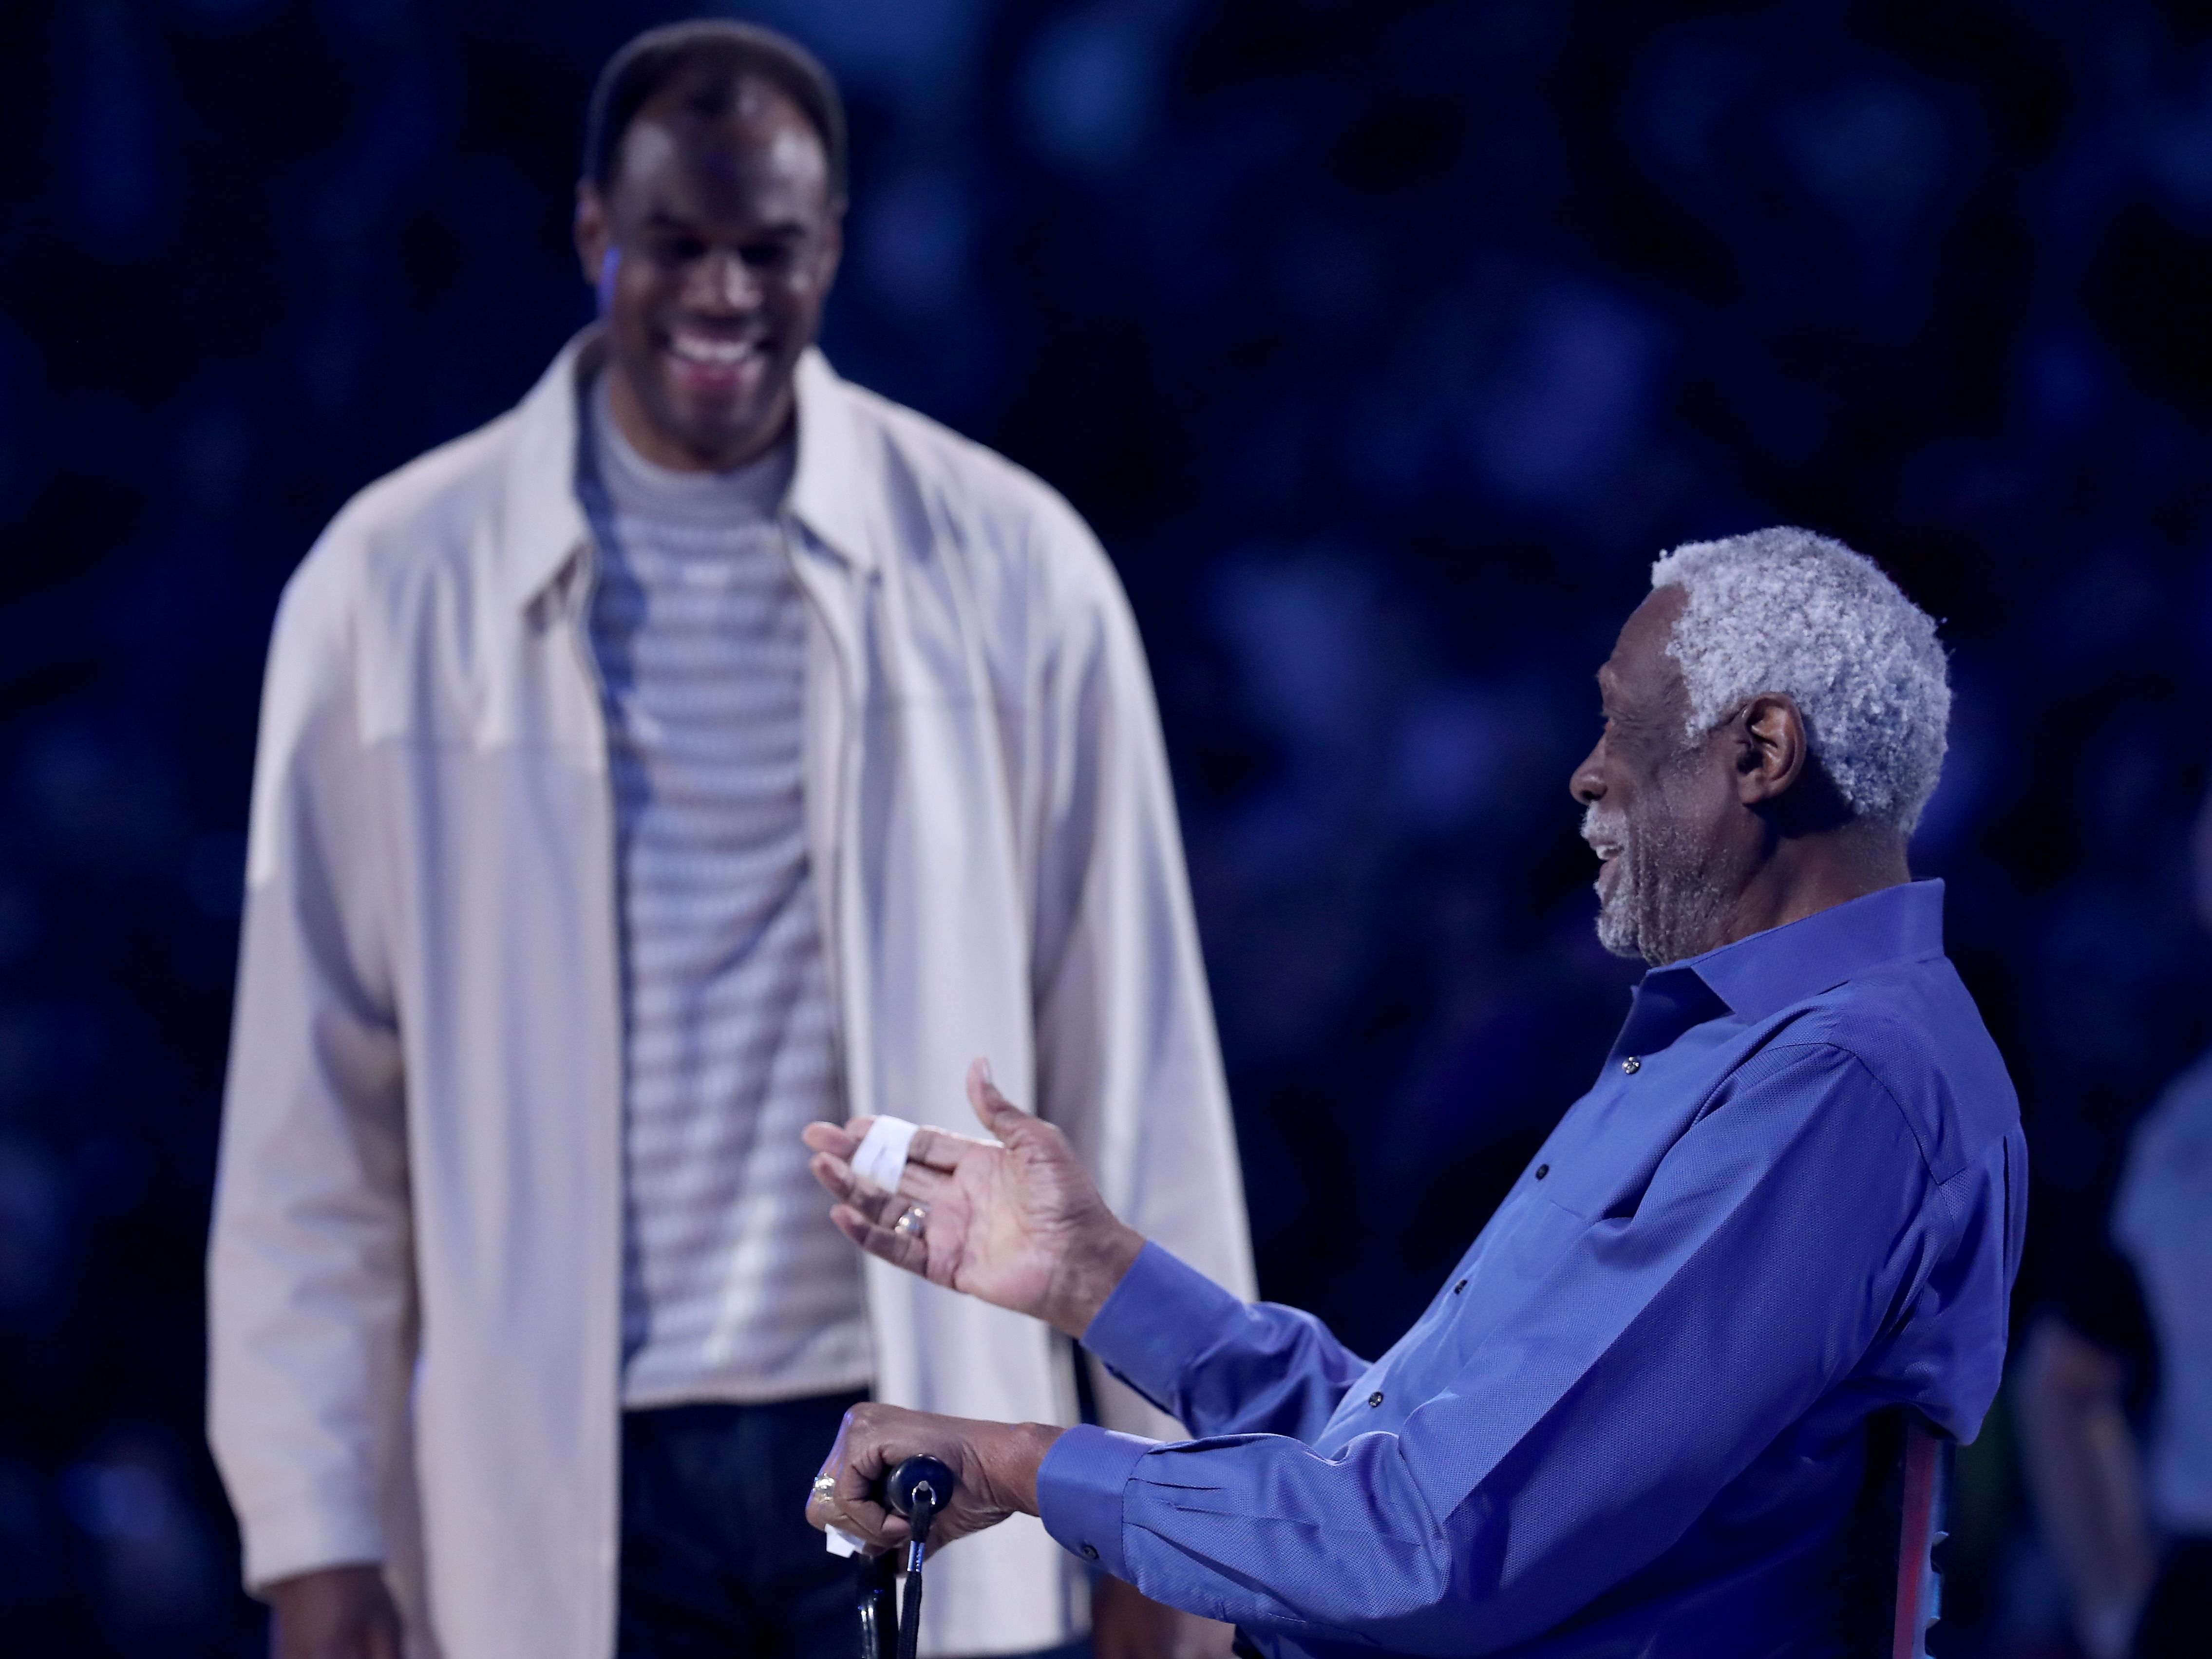 David Robinson and Bill Russell at the 2019 NBA All-Star Game